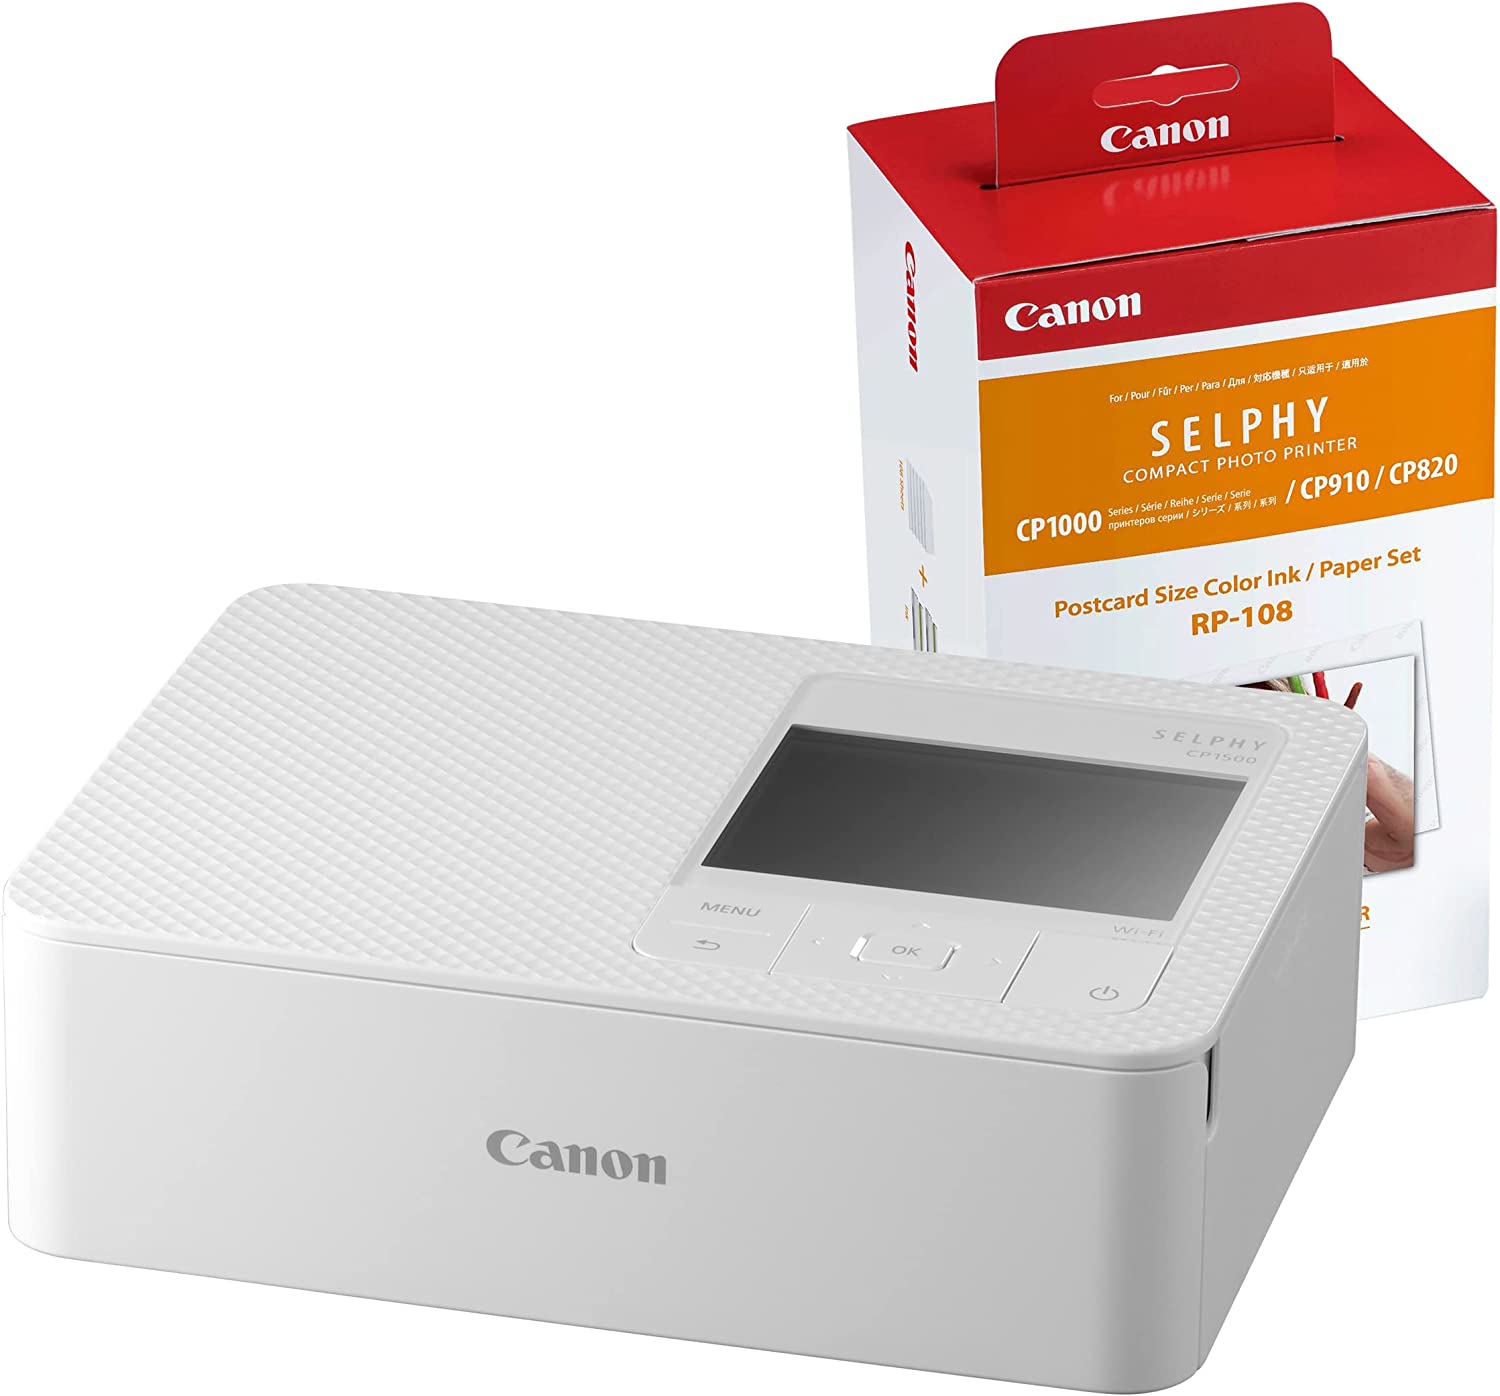 Product Image of Canon SELPHY CP1500 Compact WiFi Photo Printer and RP108 kit  - White